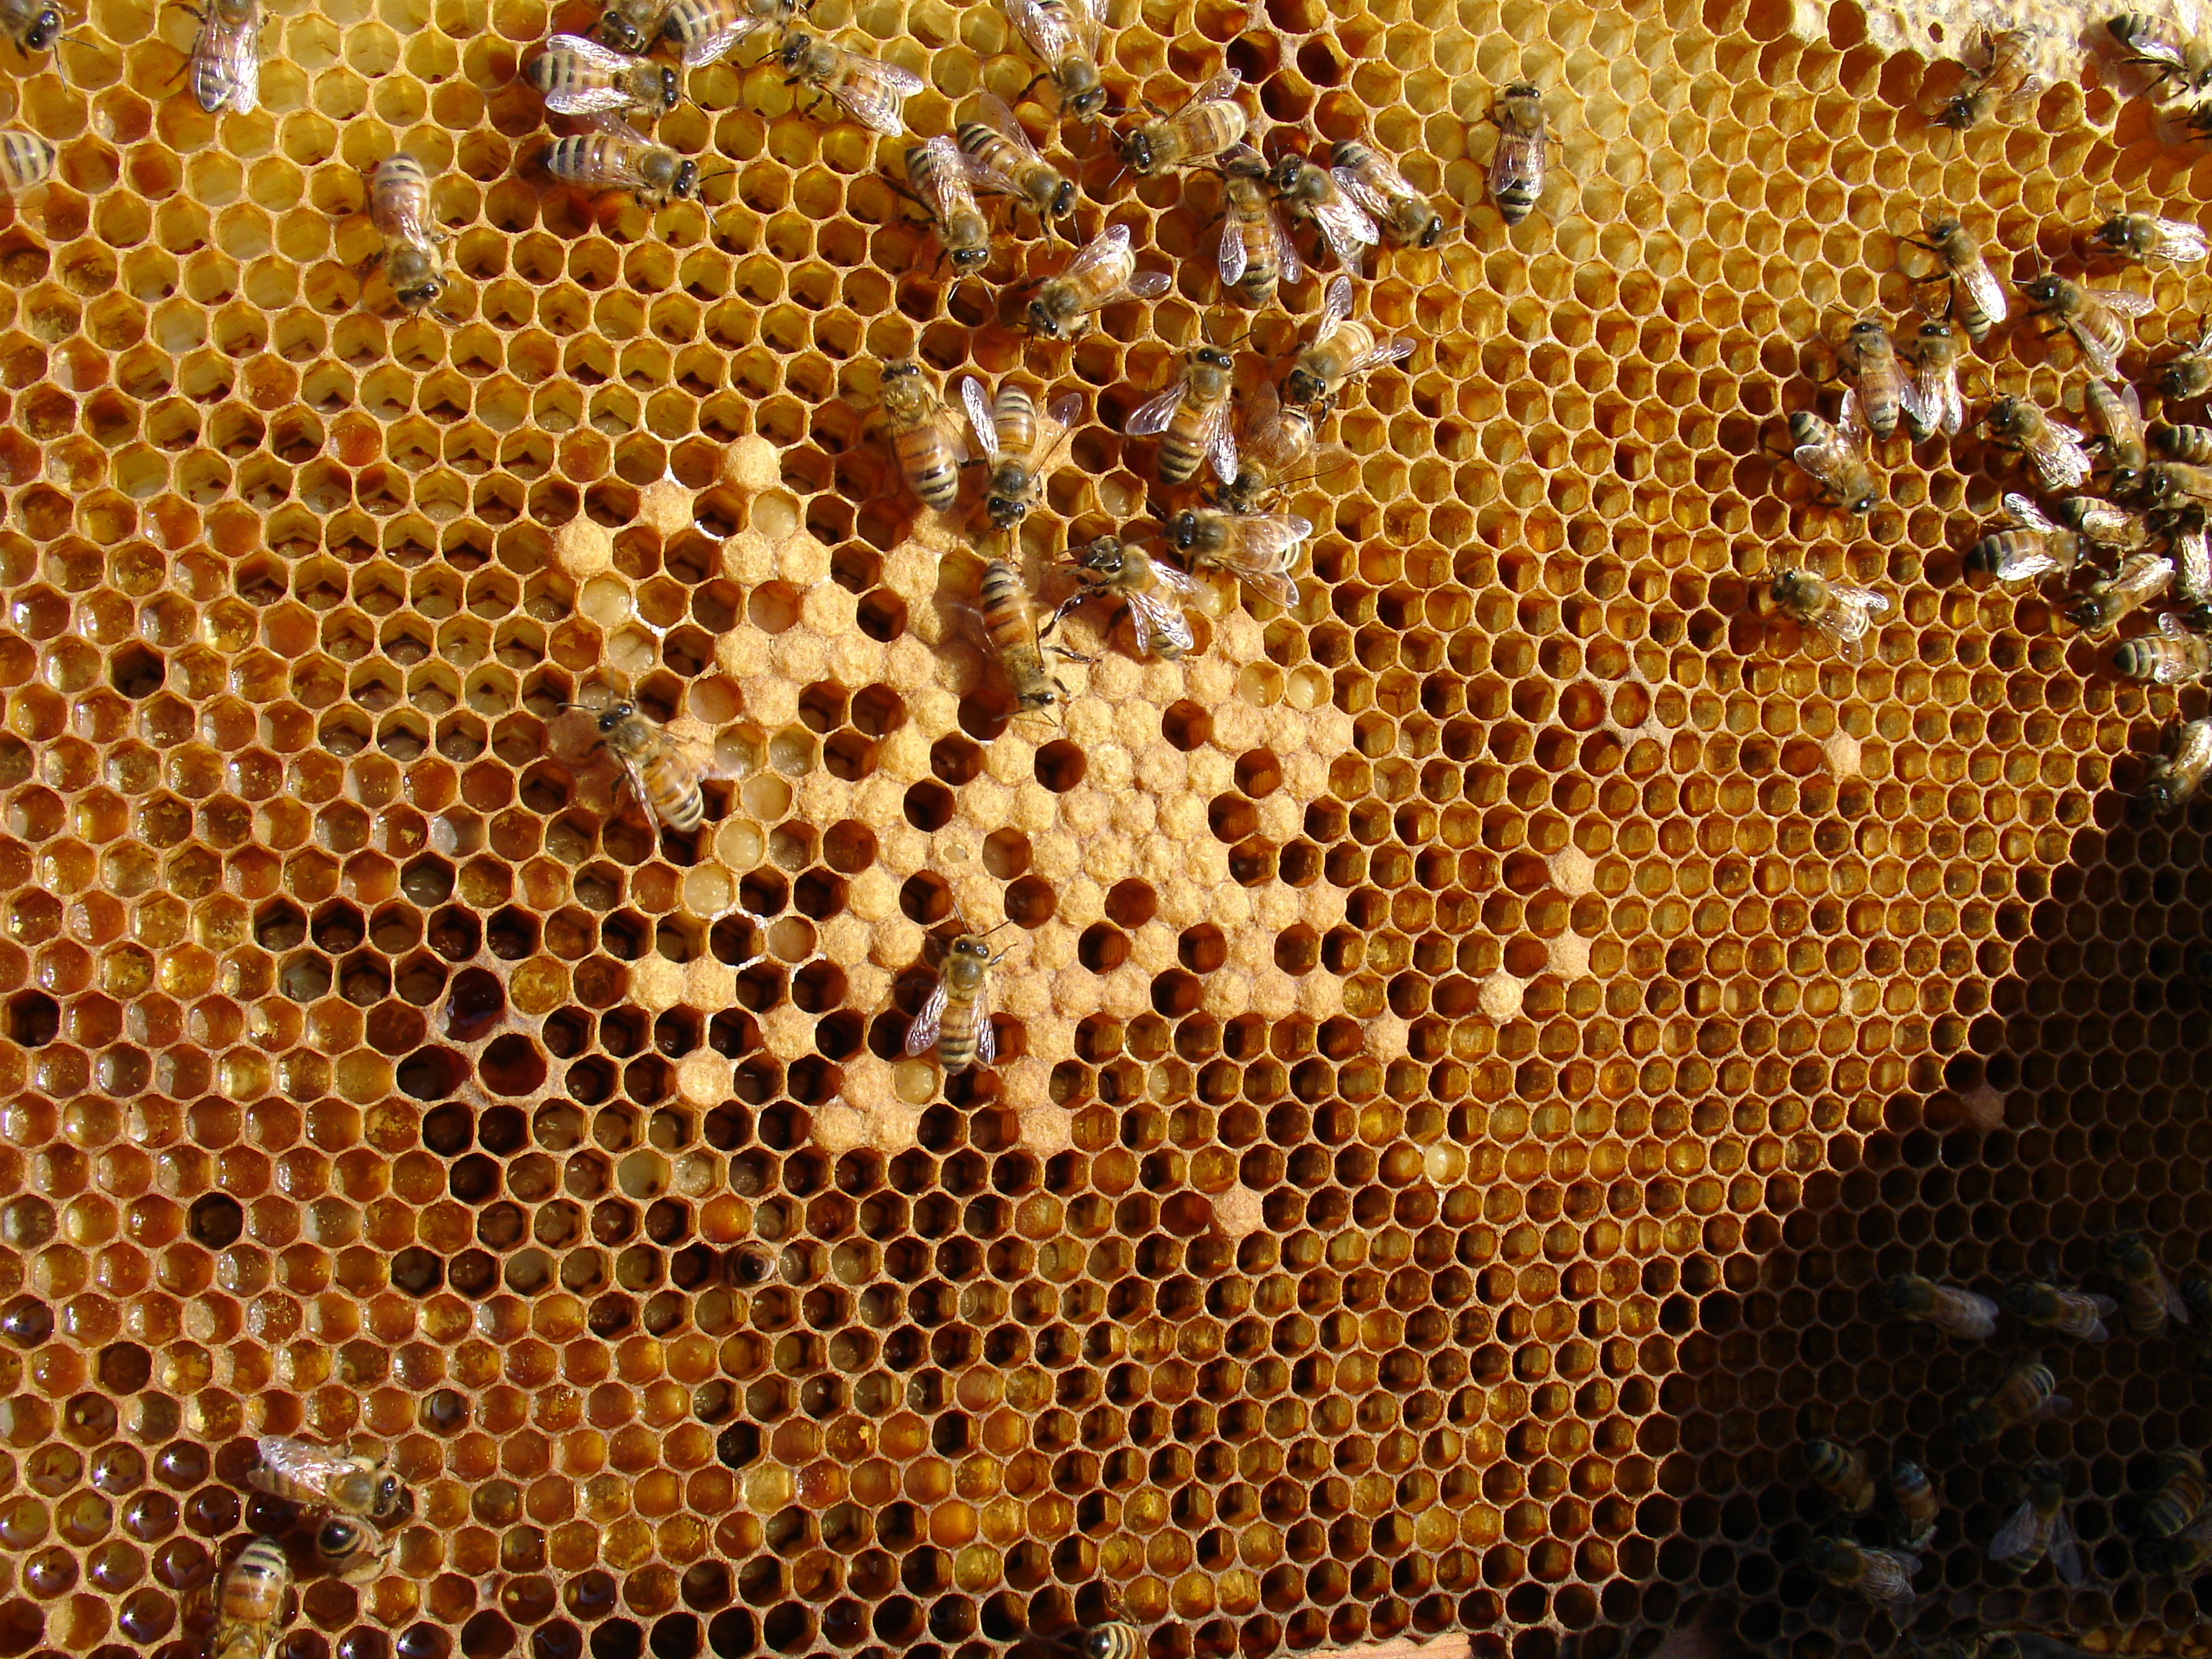 Honeybees pick up pesticides from non-crop plants.